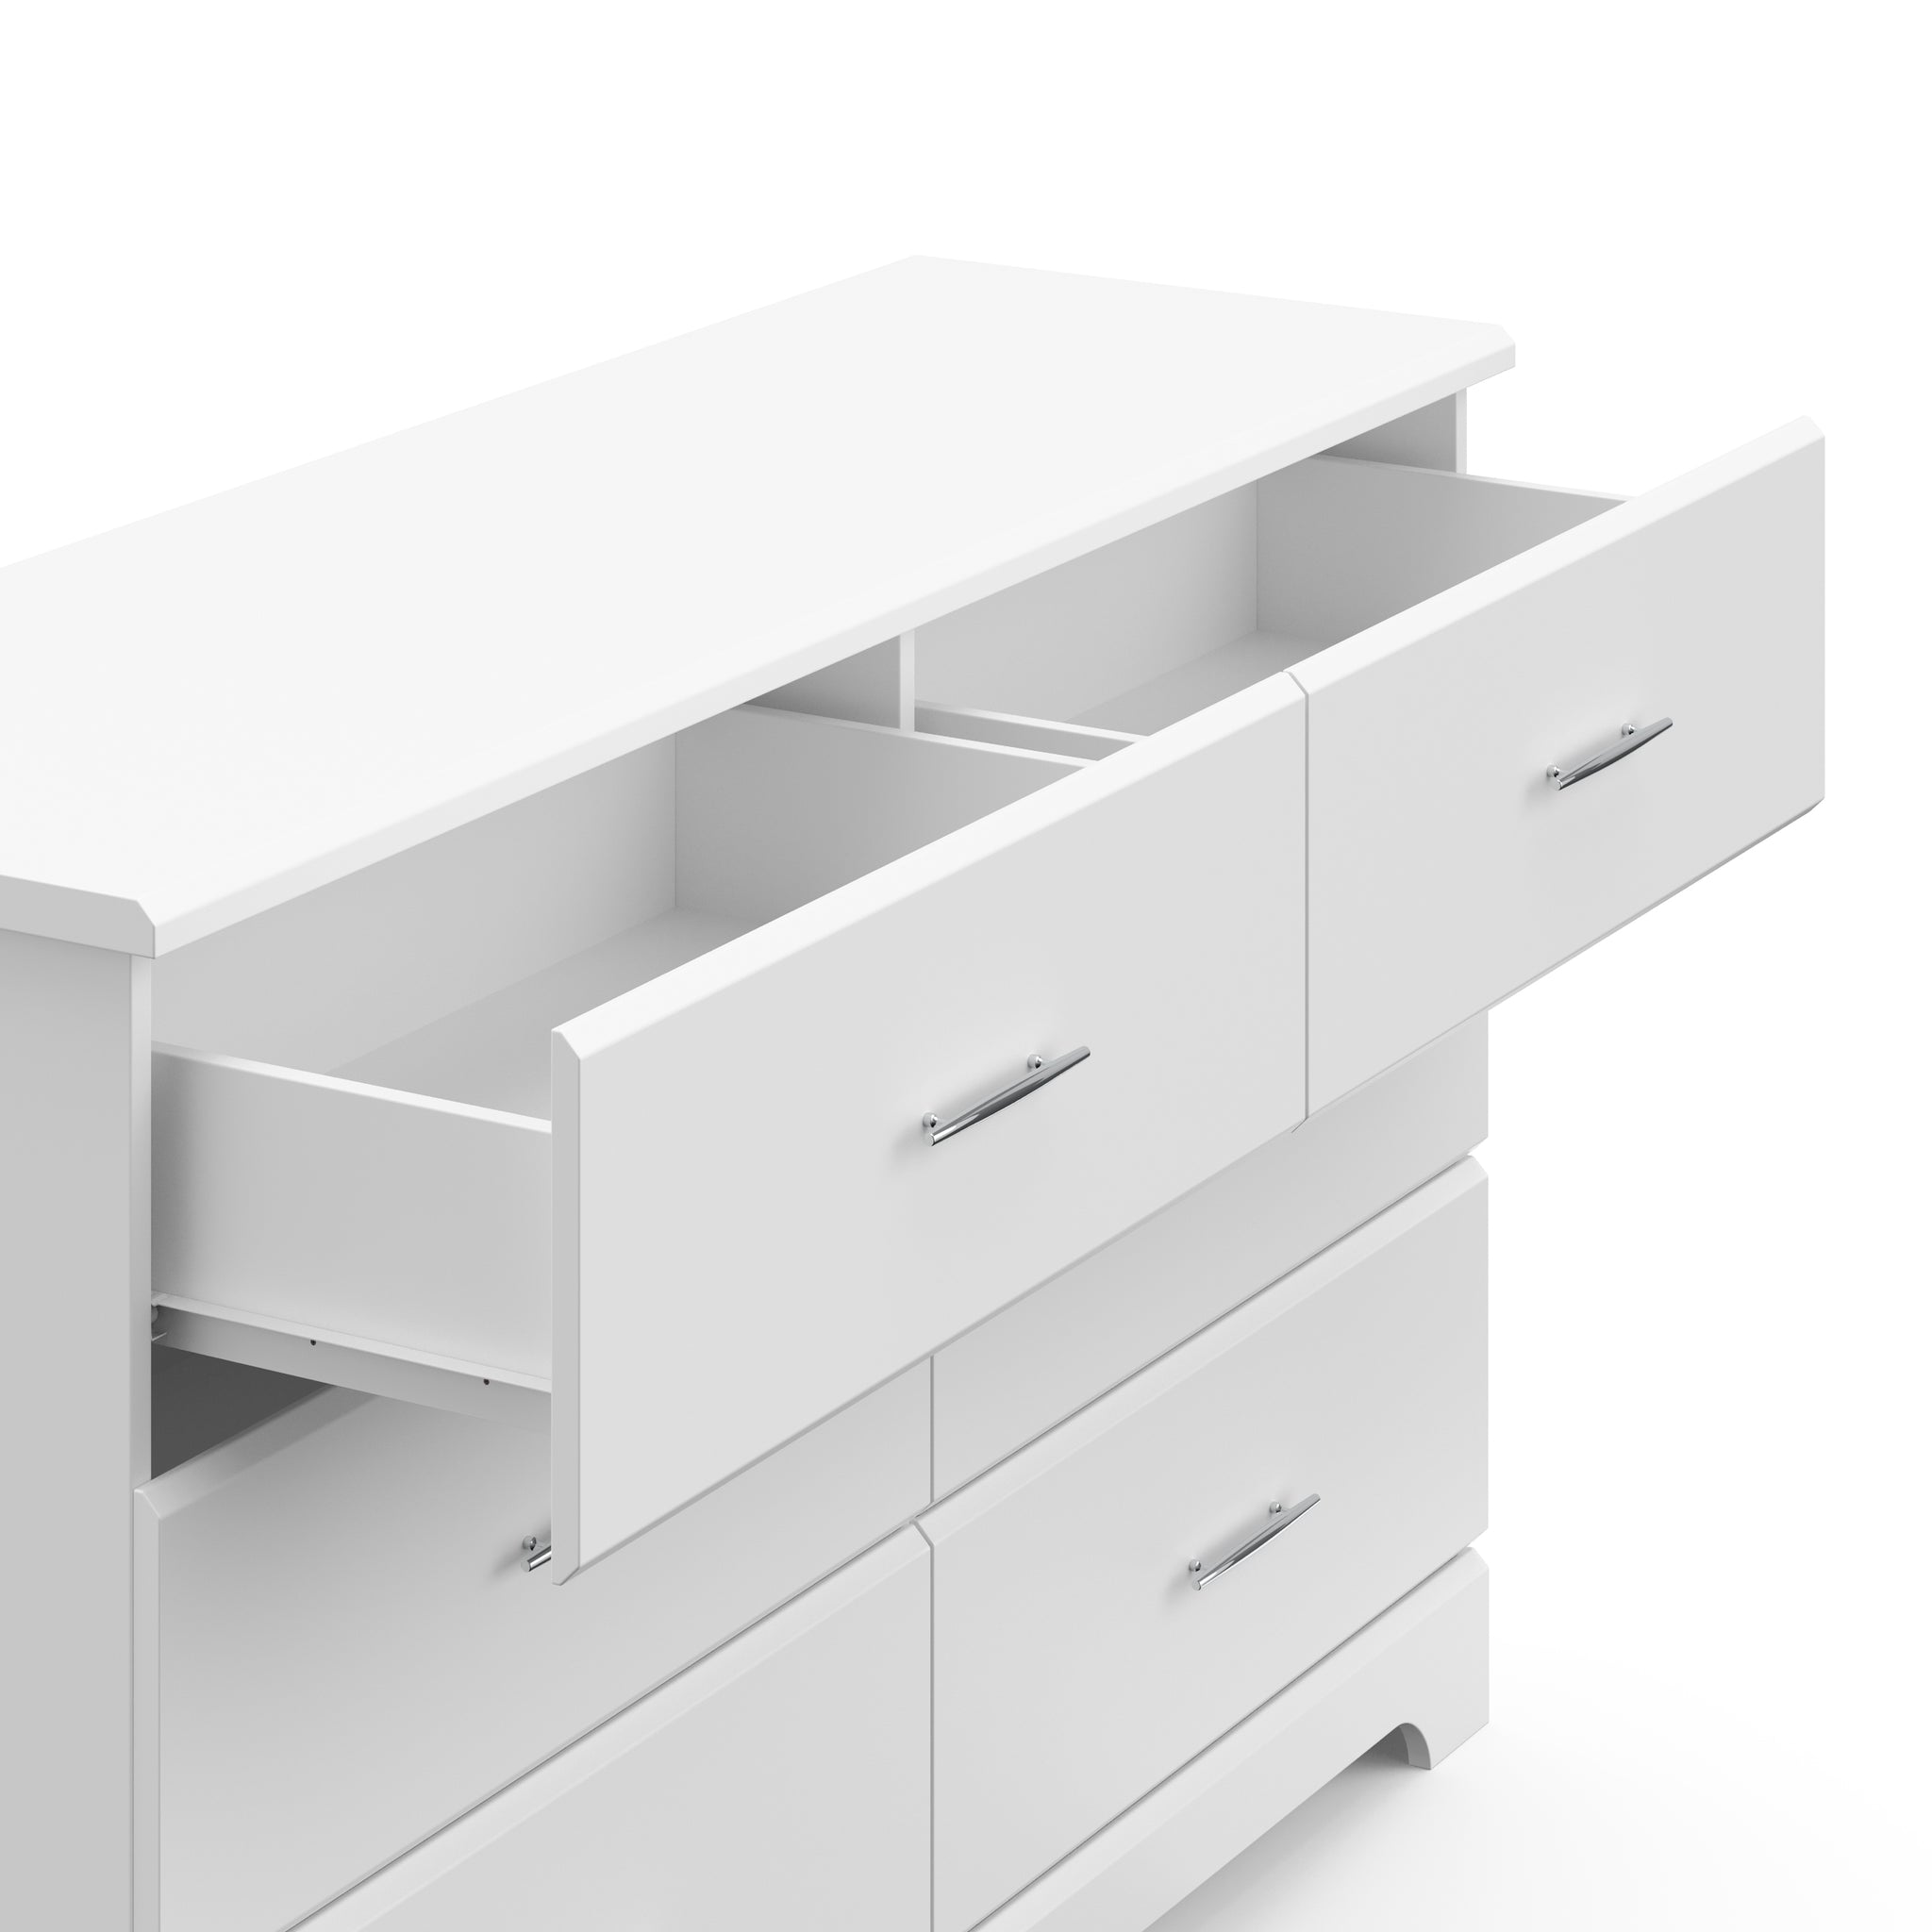 White 6 drawer dresser with 2 open drawers